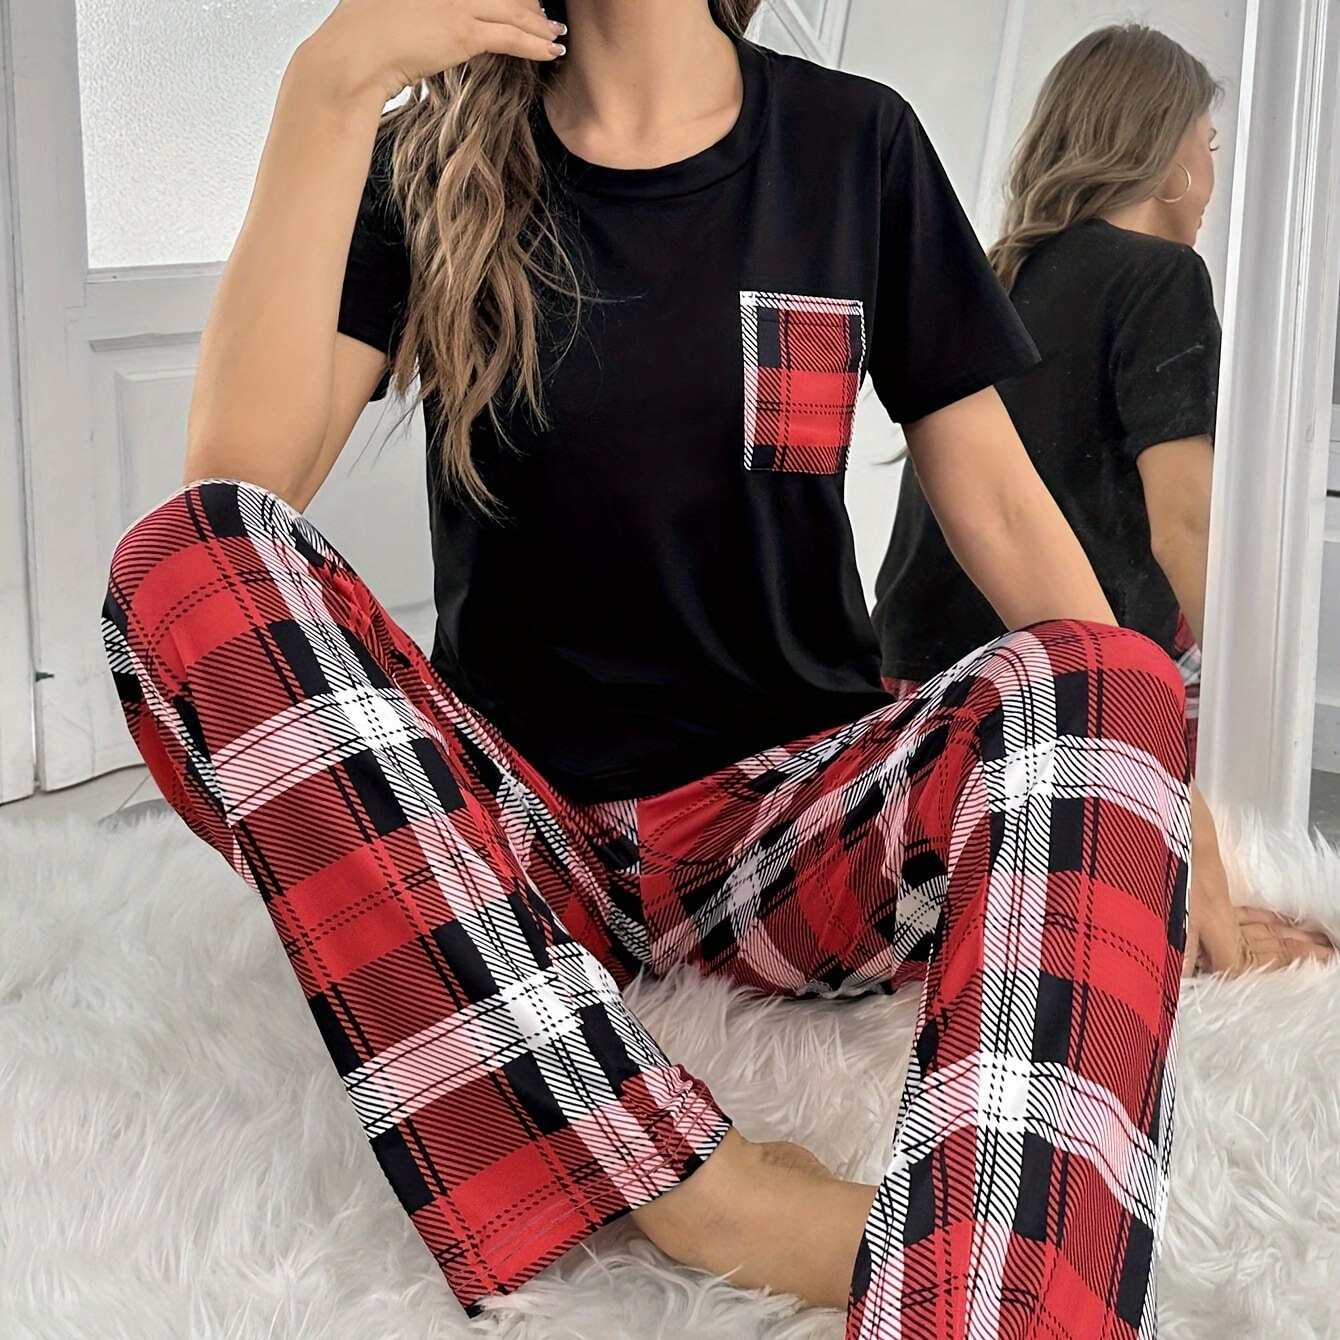 

Women's Casual Plaid Print Pajama Set, Cozy Short Sleeve Top And Pants, Comfy Sleepwear, Relaxed Fit